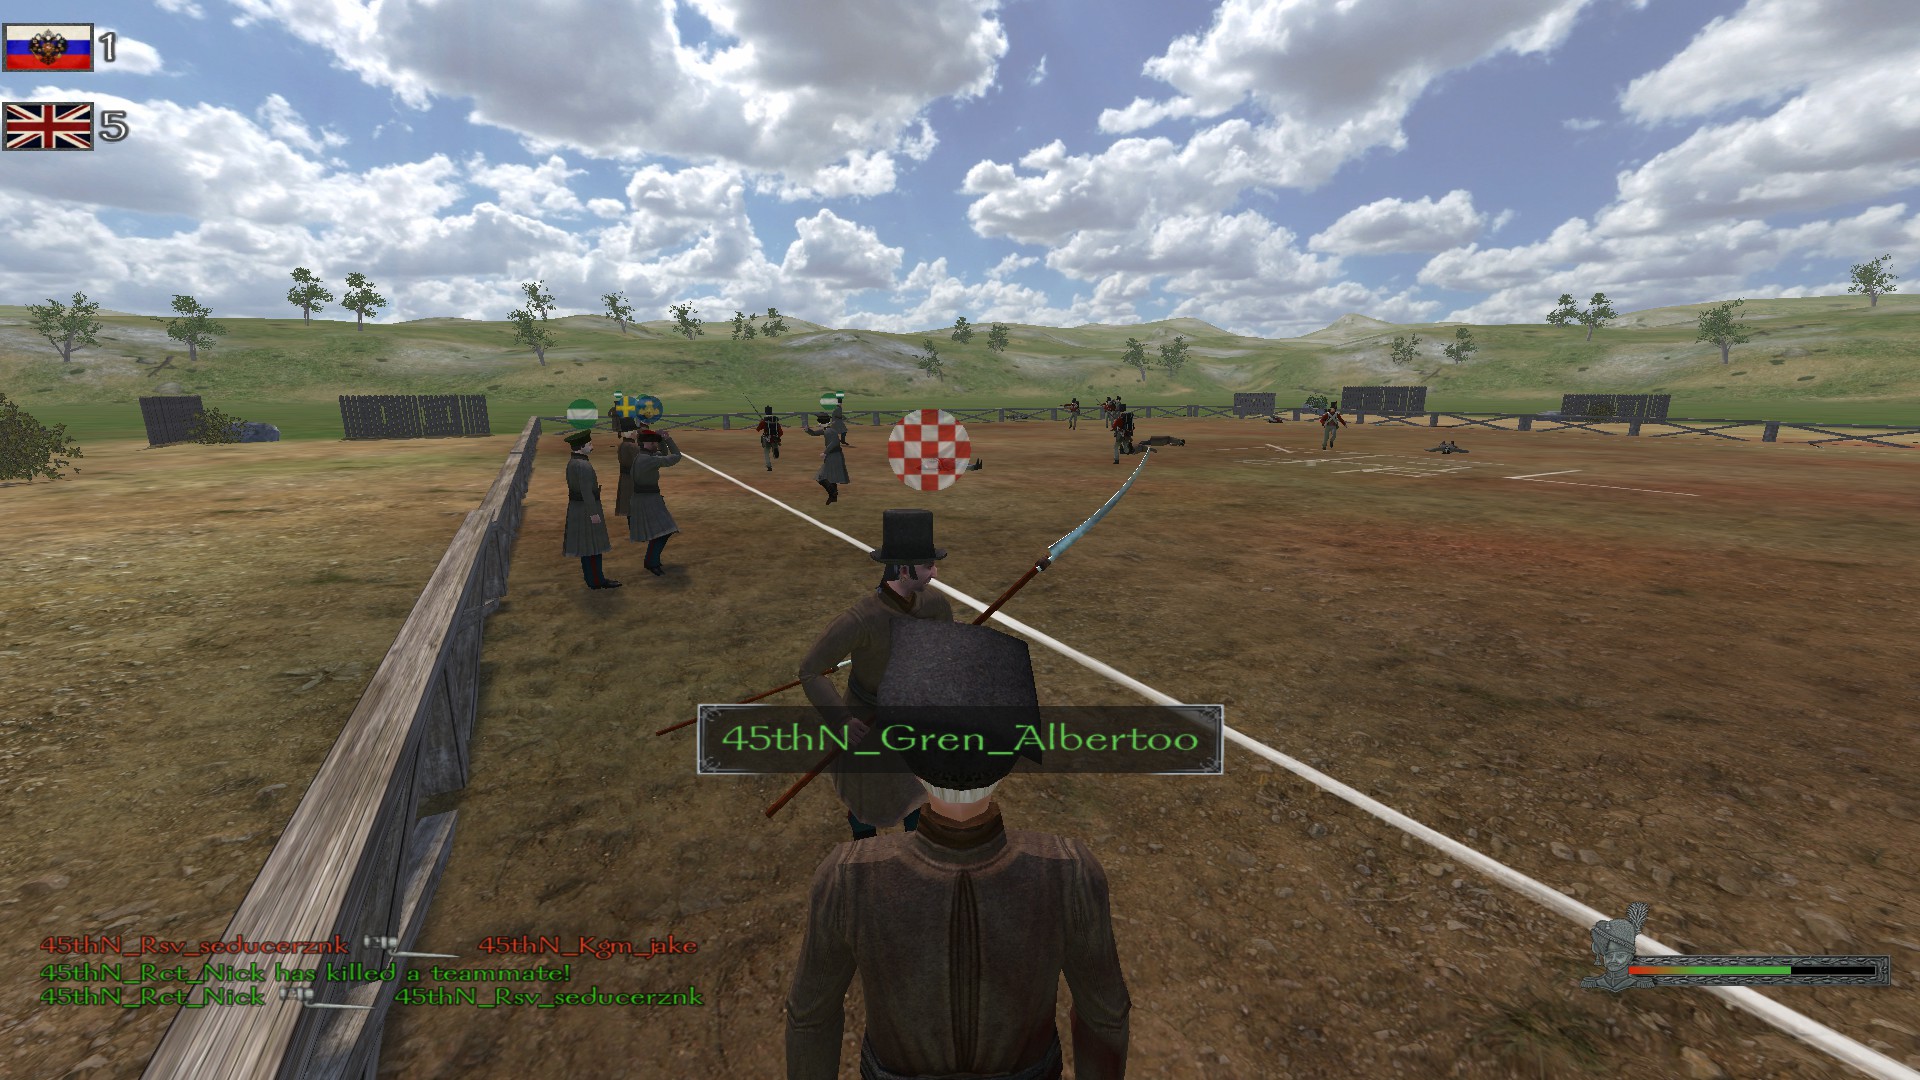 Mount & Blade: Warband - How to Join 45thN regiment - 45thN Nottinghamshire Regiment of Foot - A03C3FA